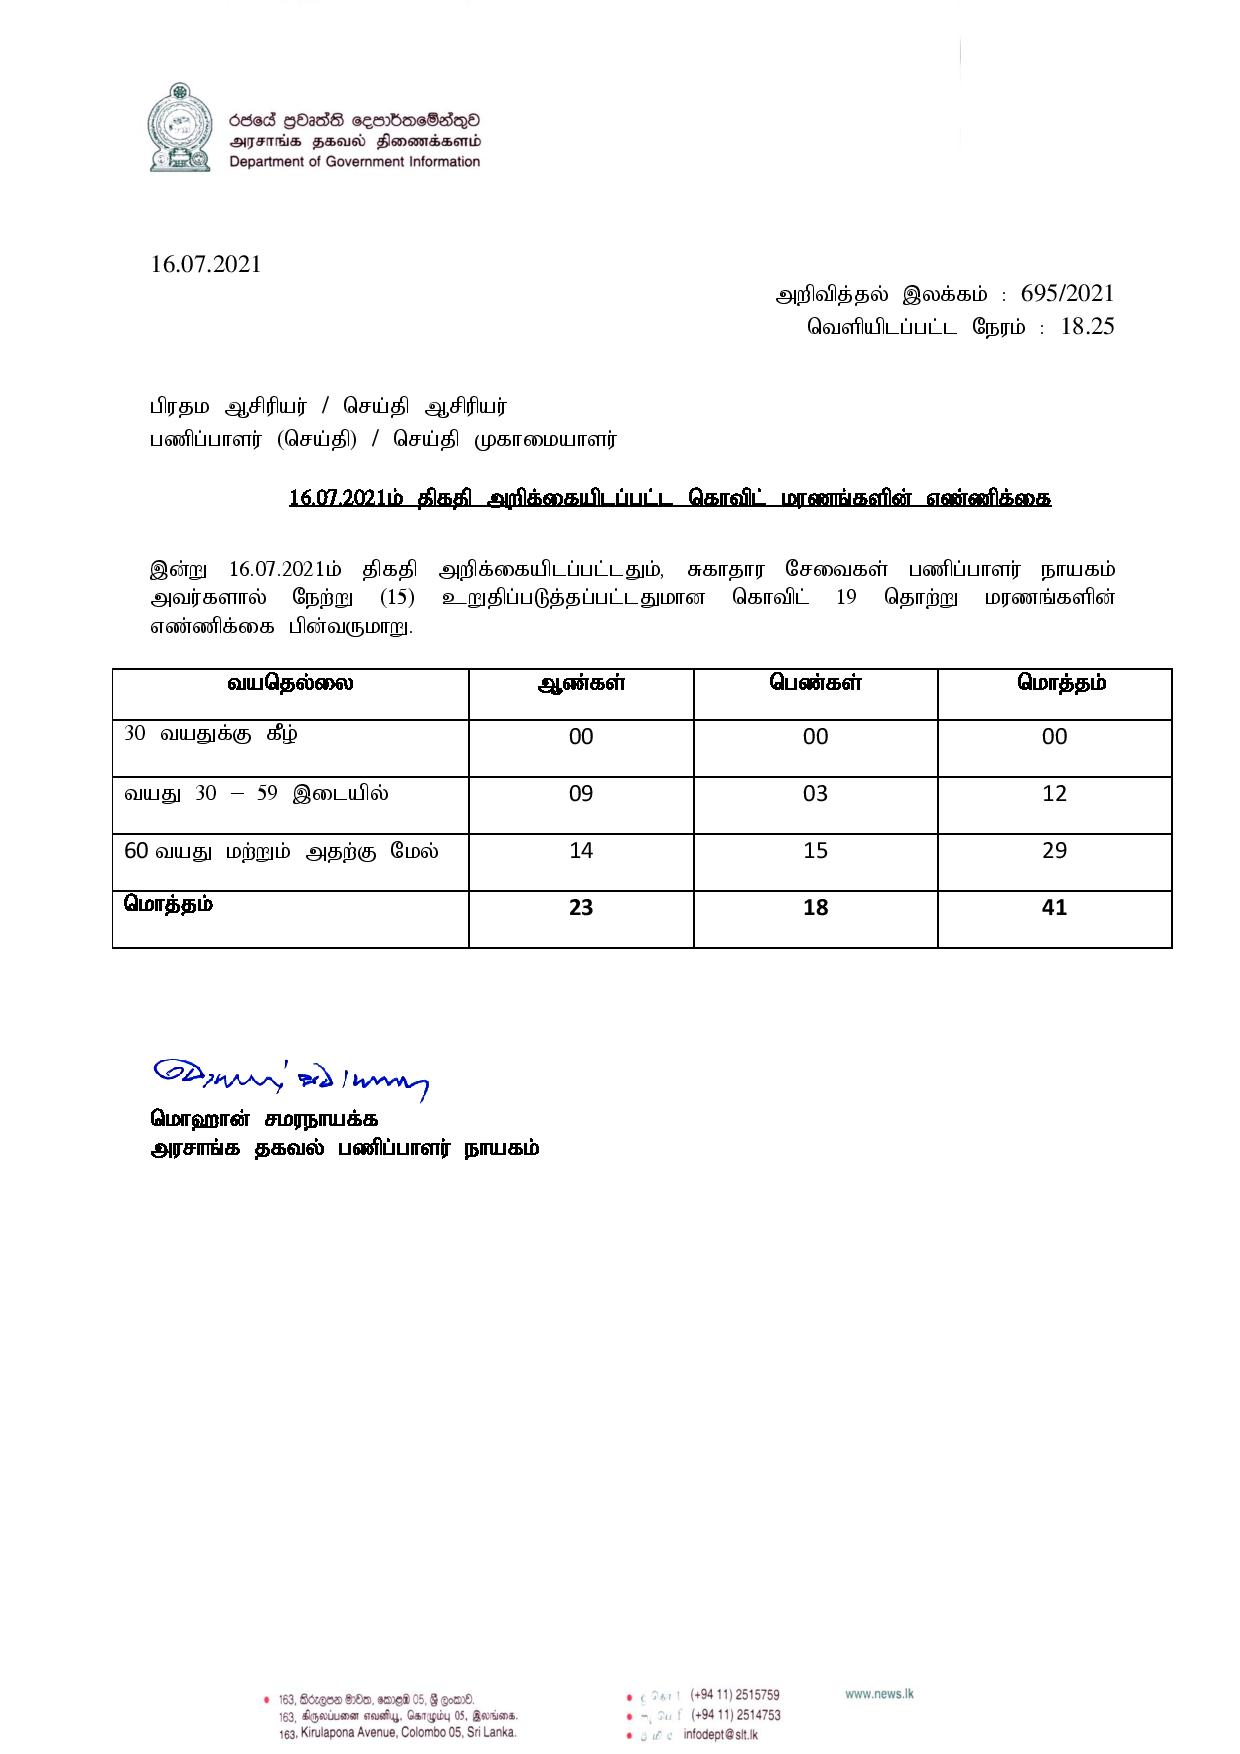 Release 695 Tamil page 001